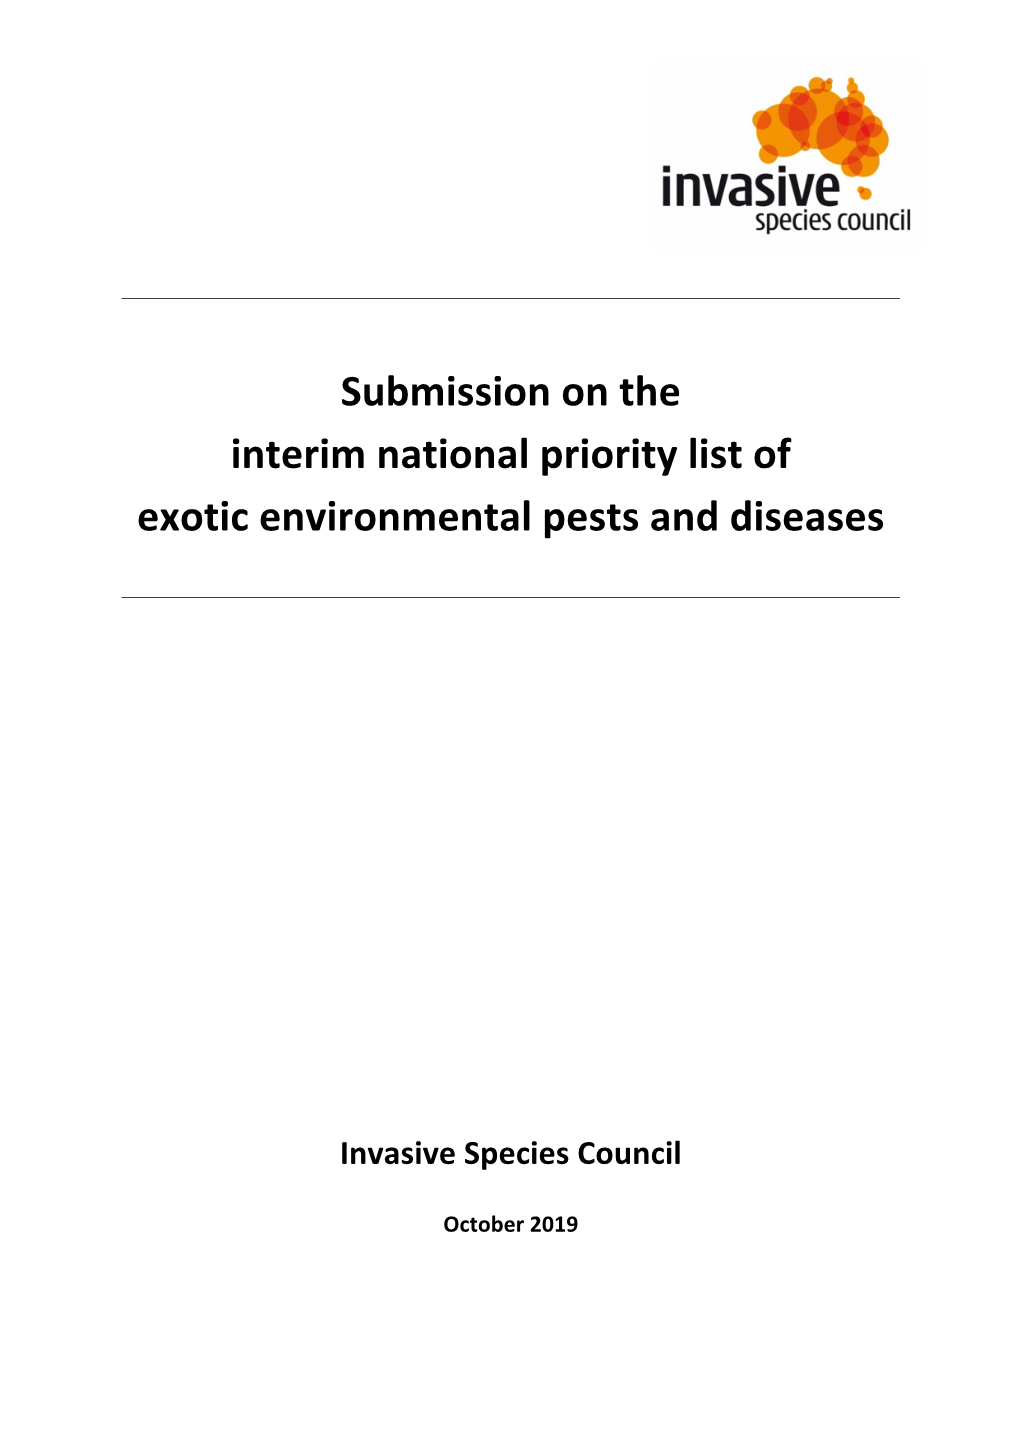 Submission on the Interim National Priority List of Exotic Environmental Pests and Diseases